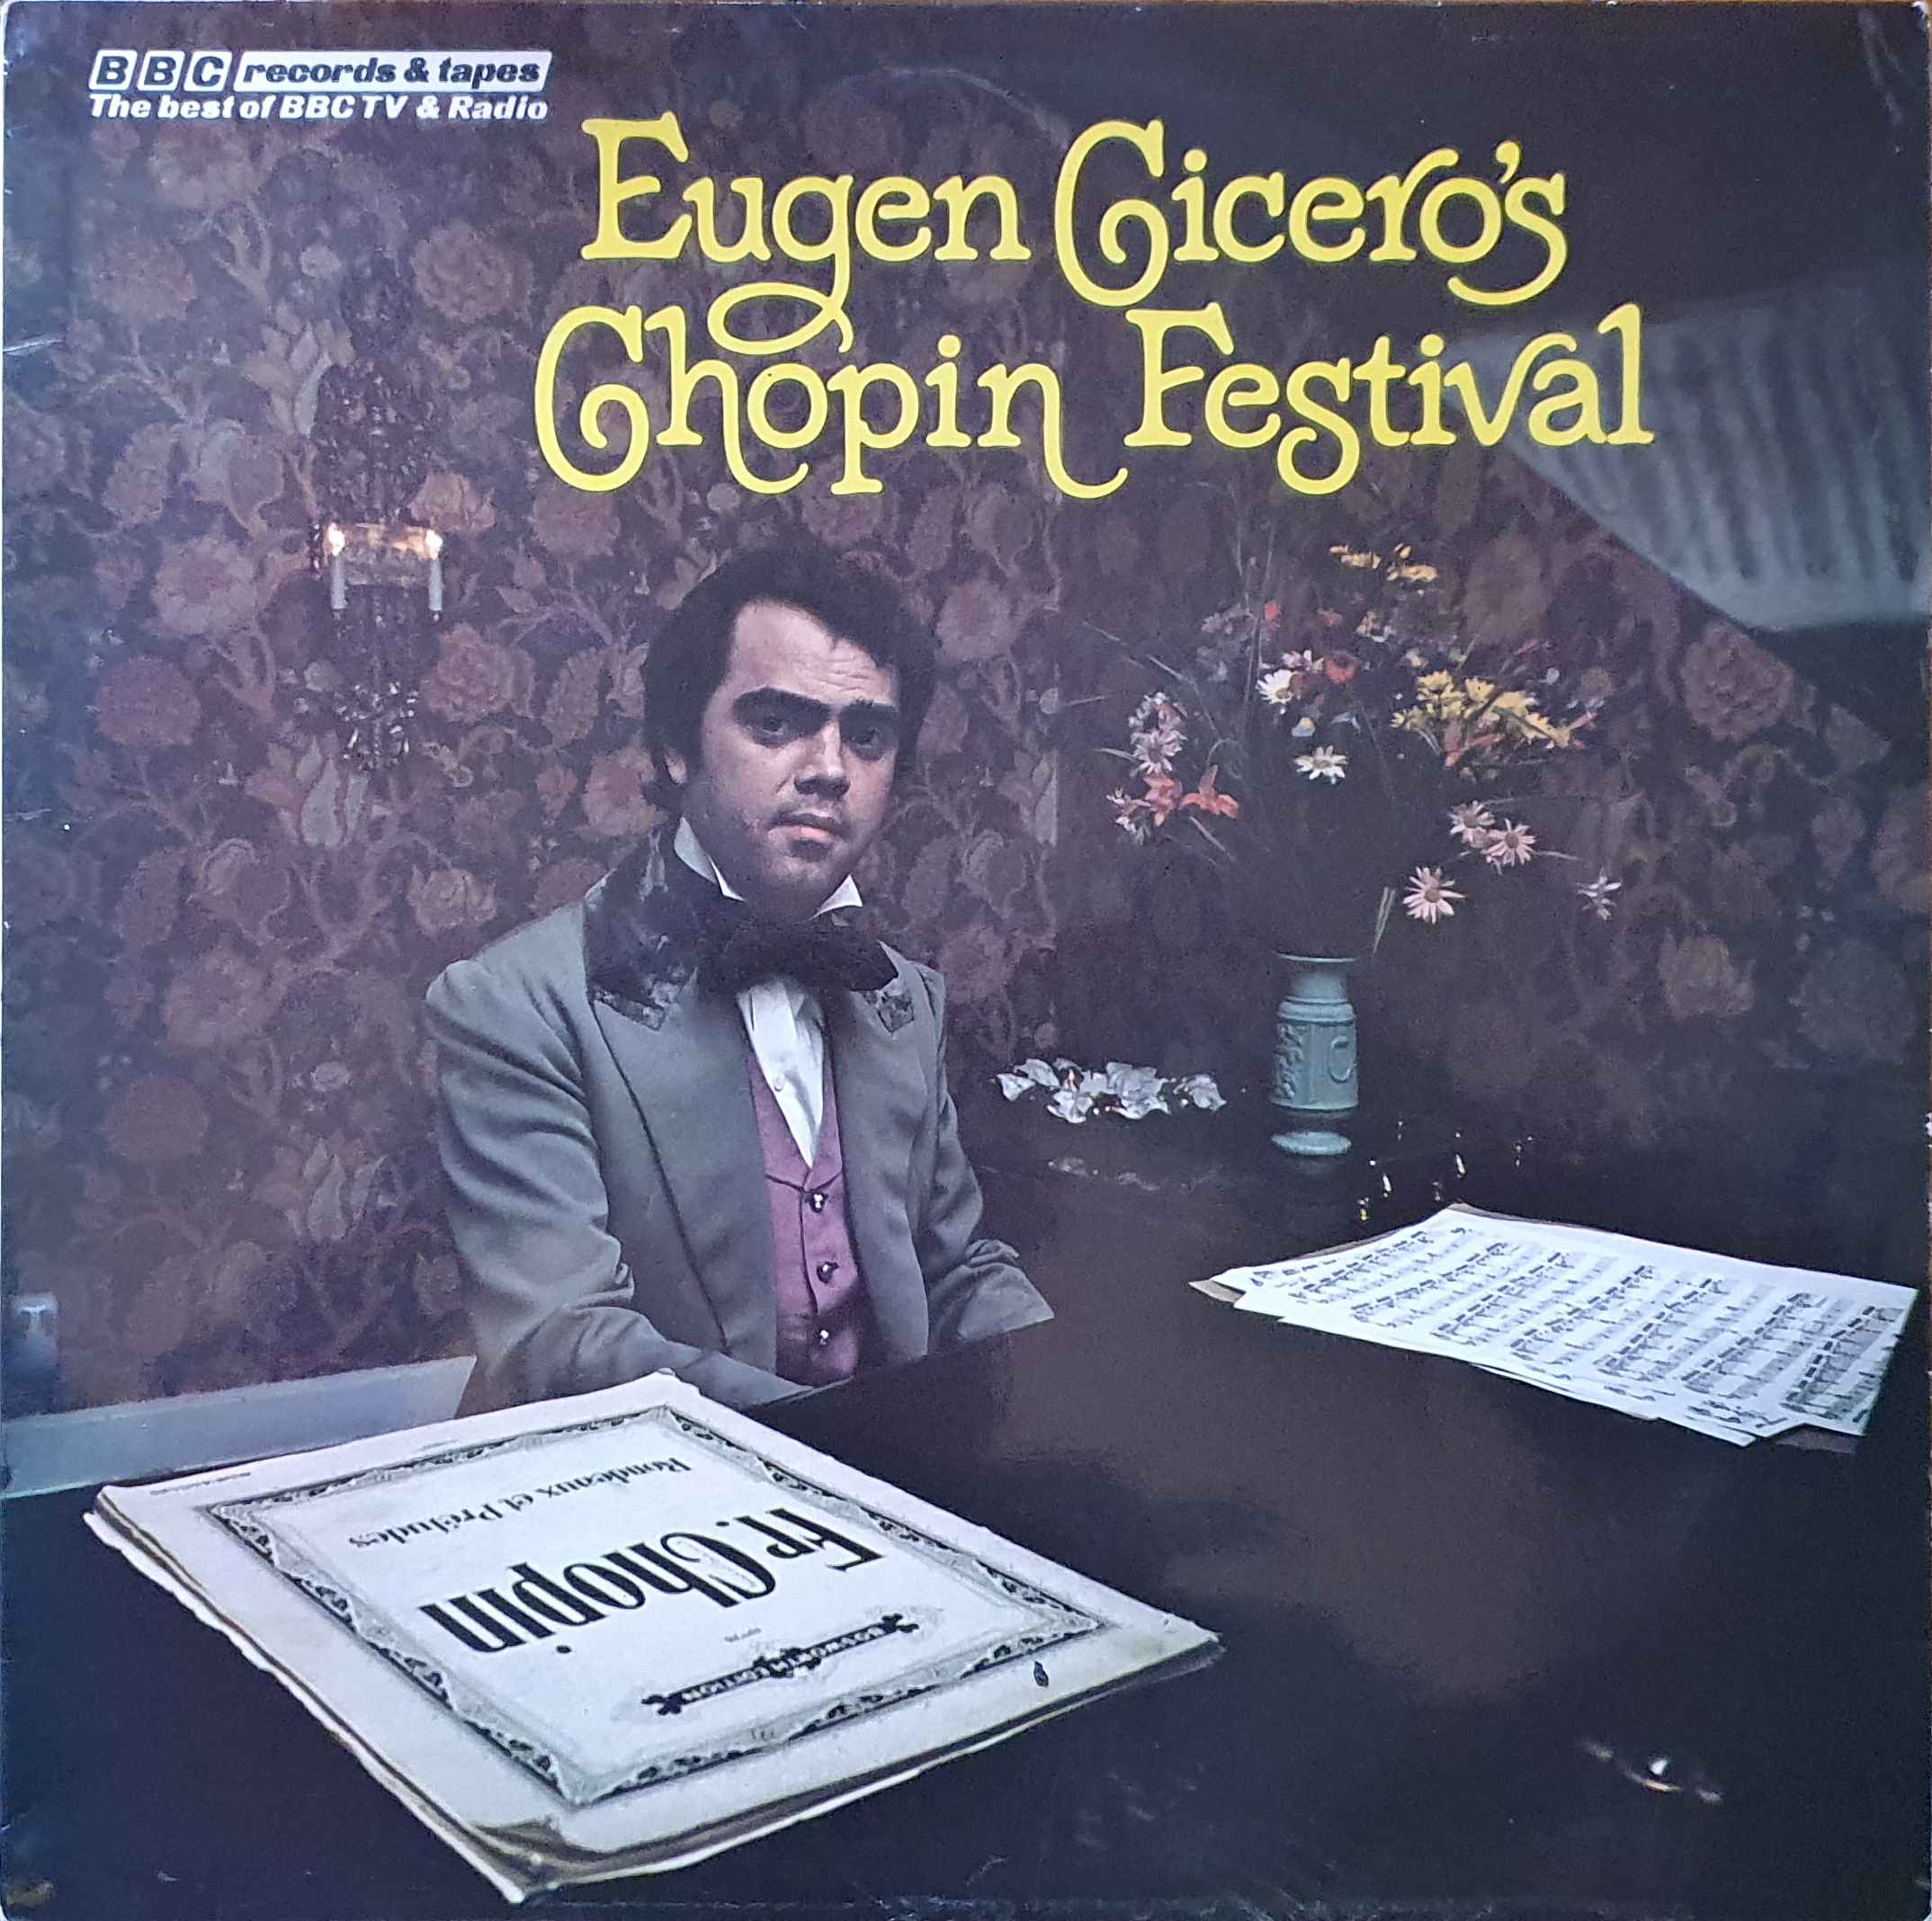 Picture of REB 219 Eugen Cicero's Chopin festival by artist Chopin from the BBC albums - Records and Tapes library